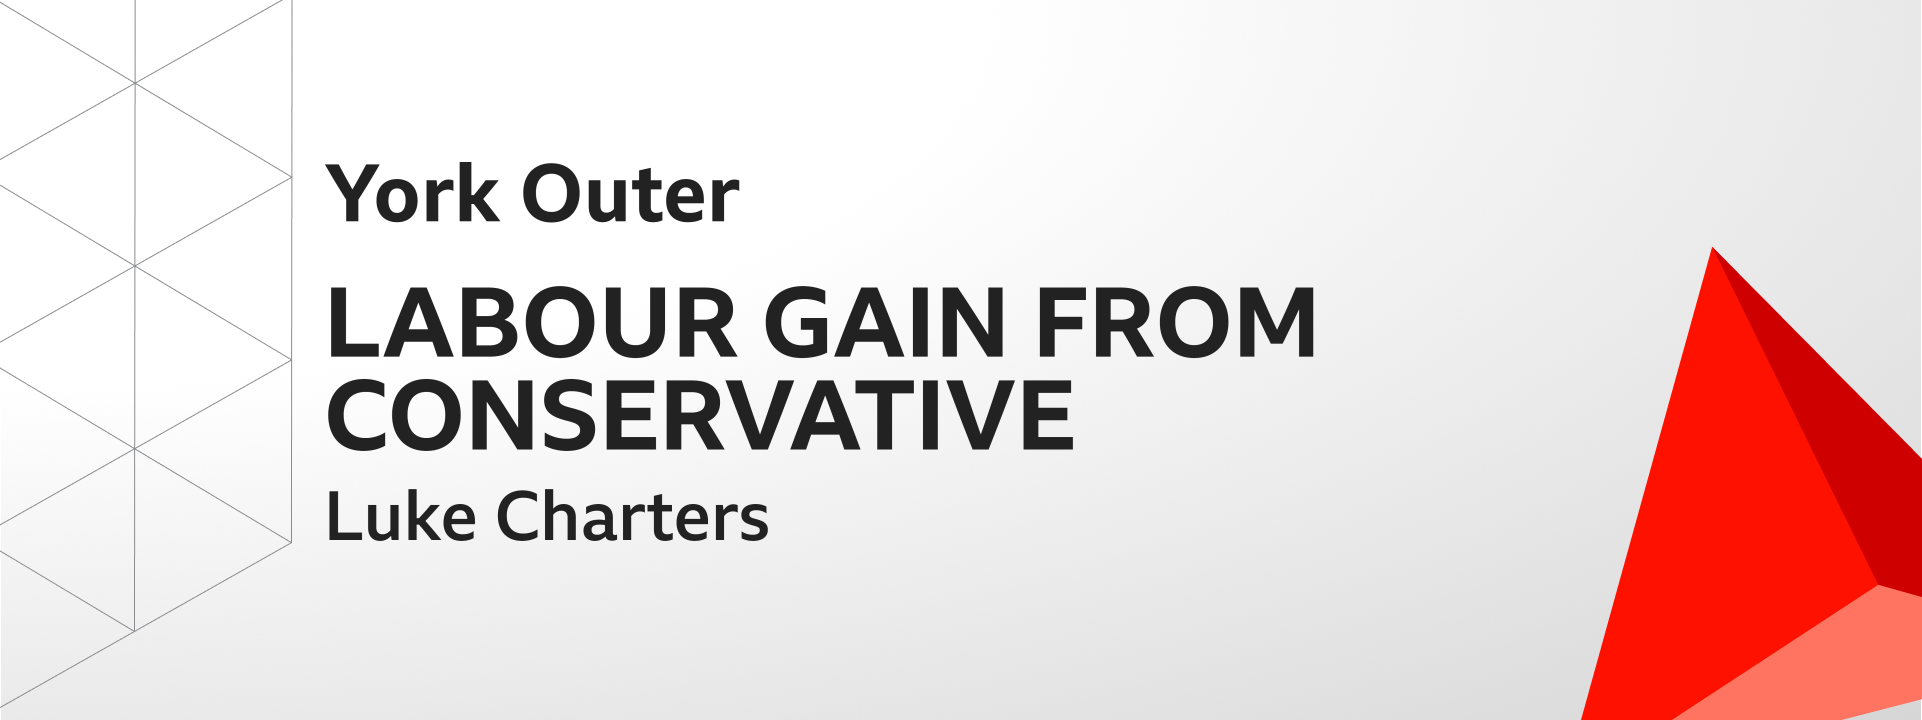 Graphic showing Labour gains York Outer from the Conservatives. The winning candidate was Luke Charters.